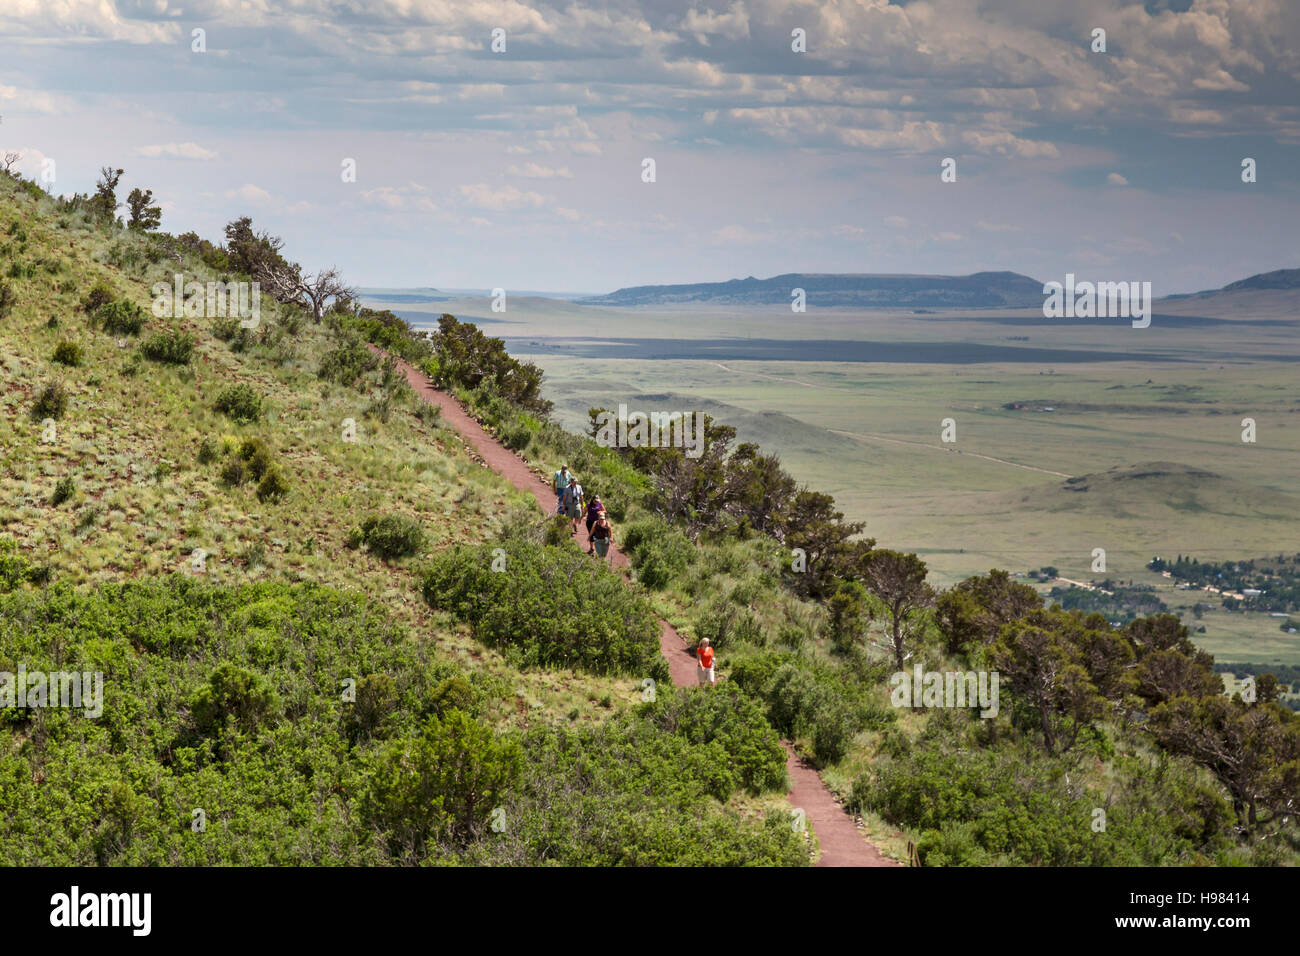 Capulin, New Mexico - Tourists hiking on the Crater Rim Trail at Capulin Volcano National Monument. Stock Photo